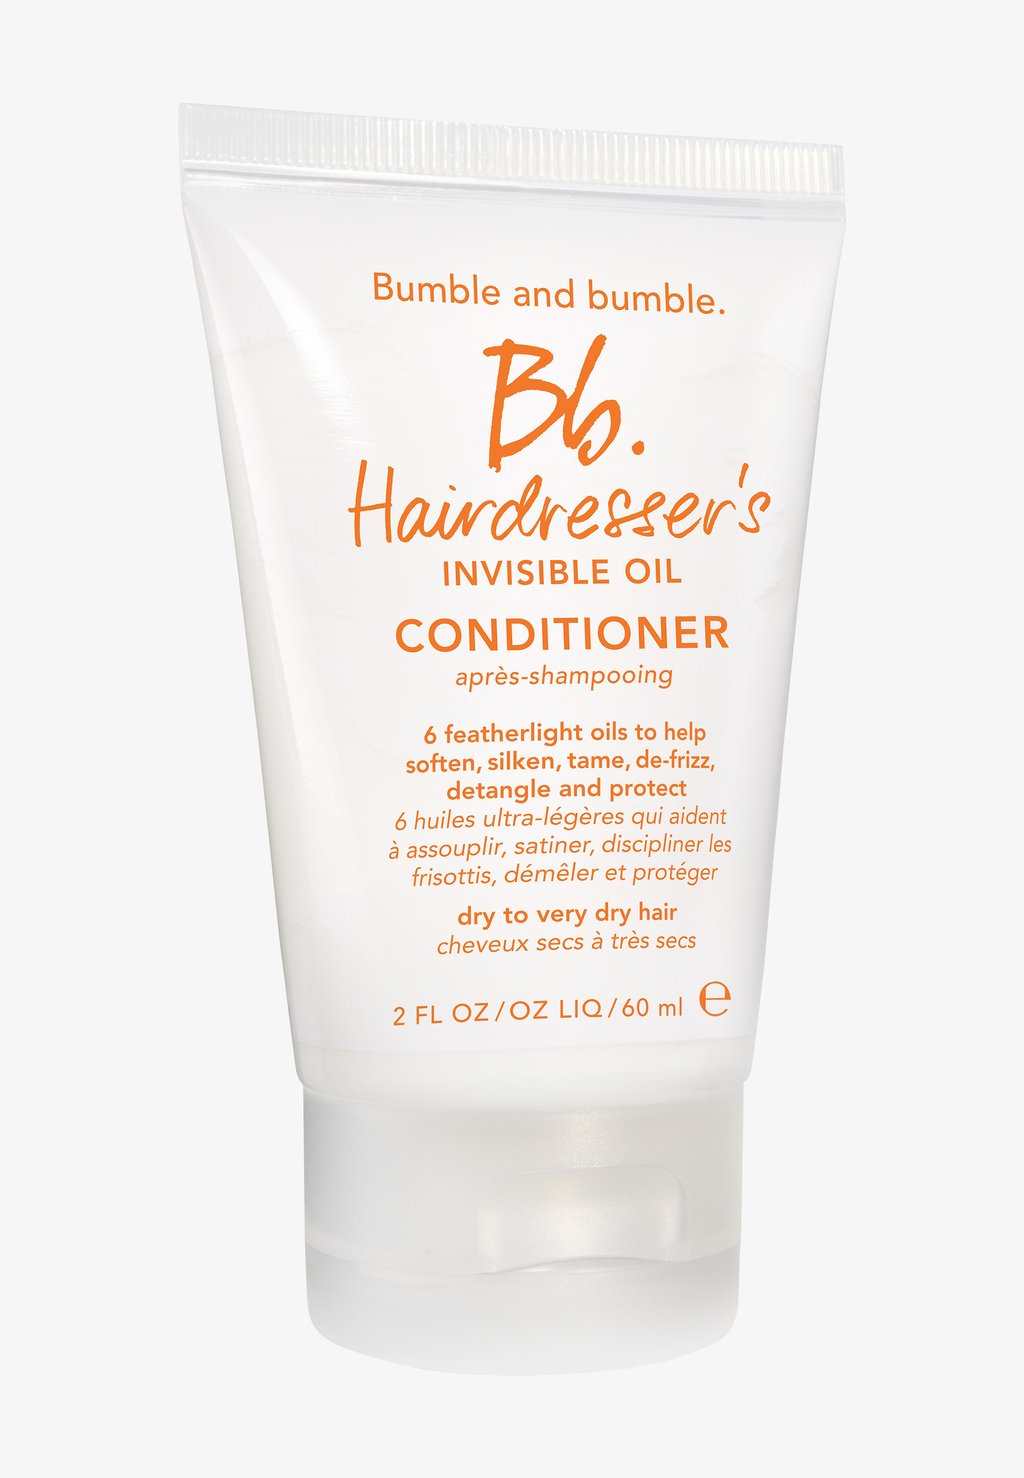 Кондиционер Hairdresser´S Invisible Oil Conditioner Bumble and bumble